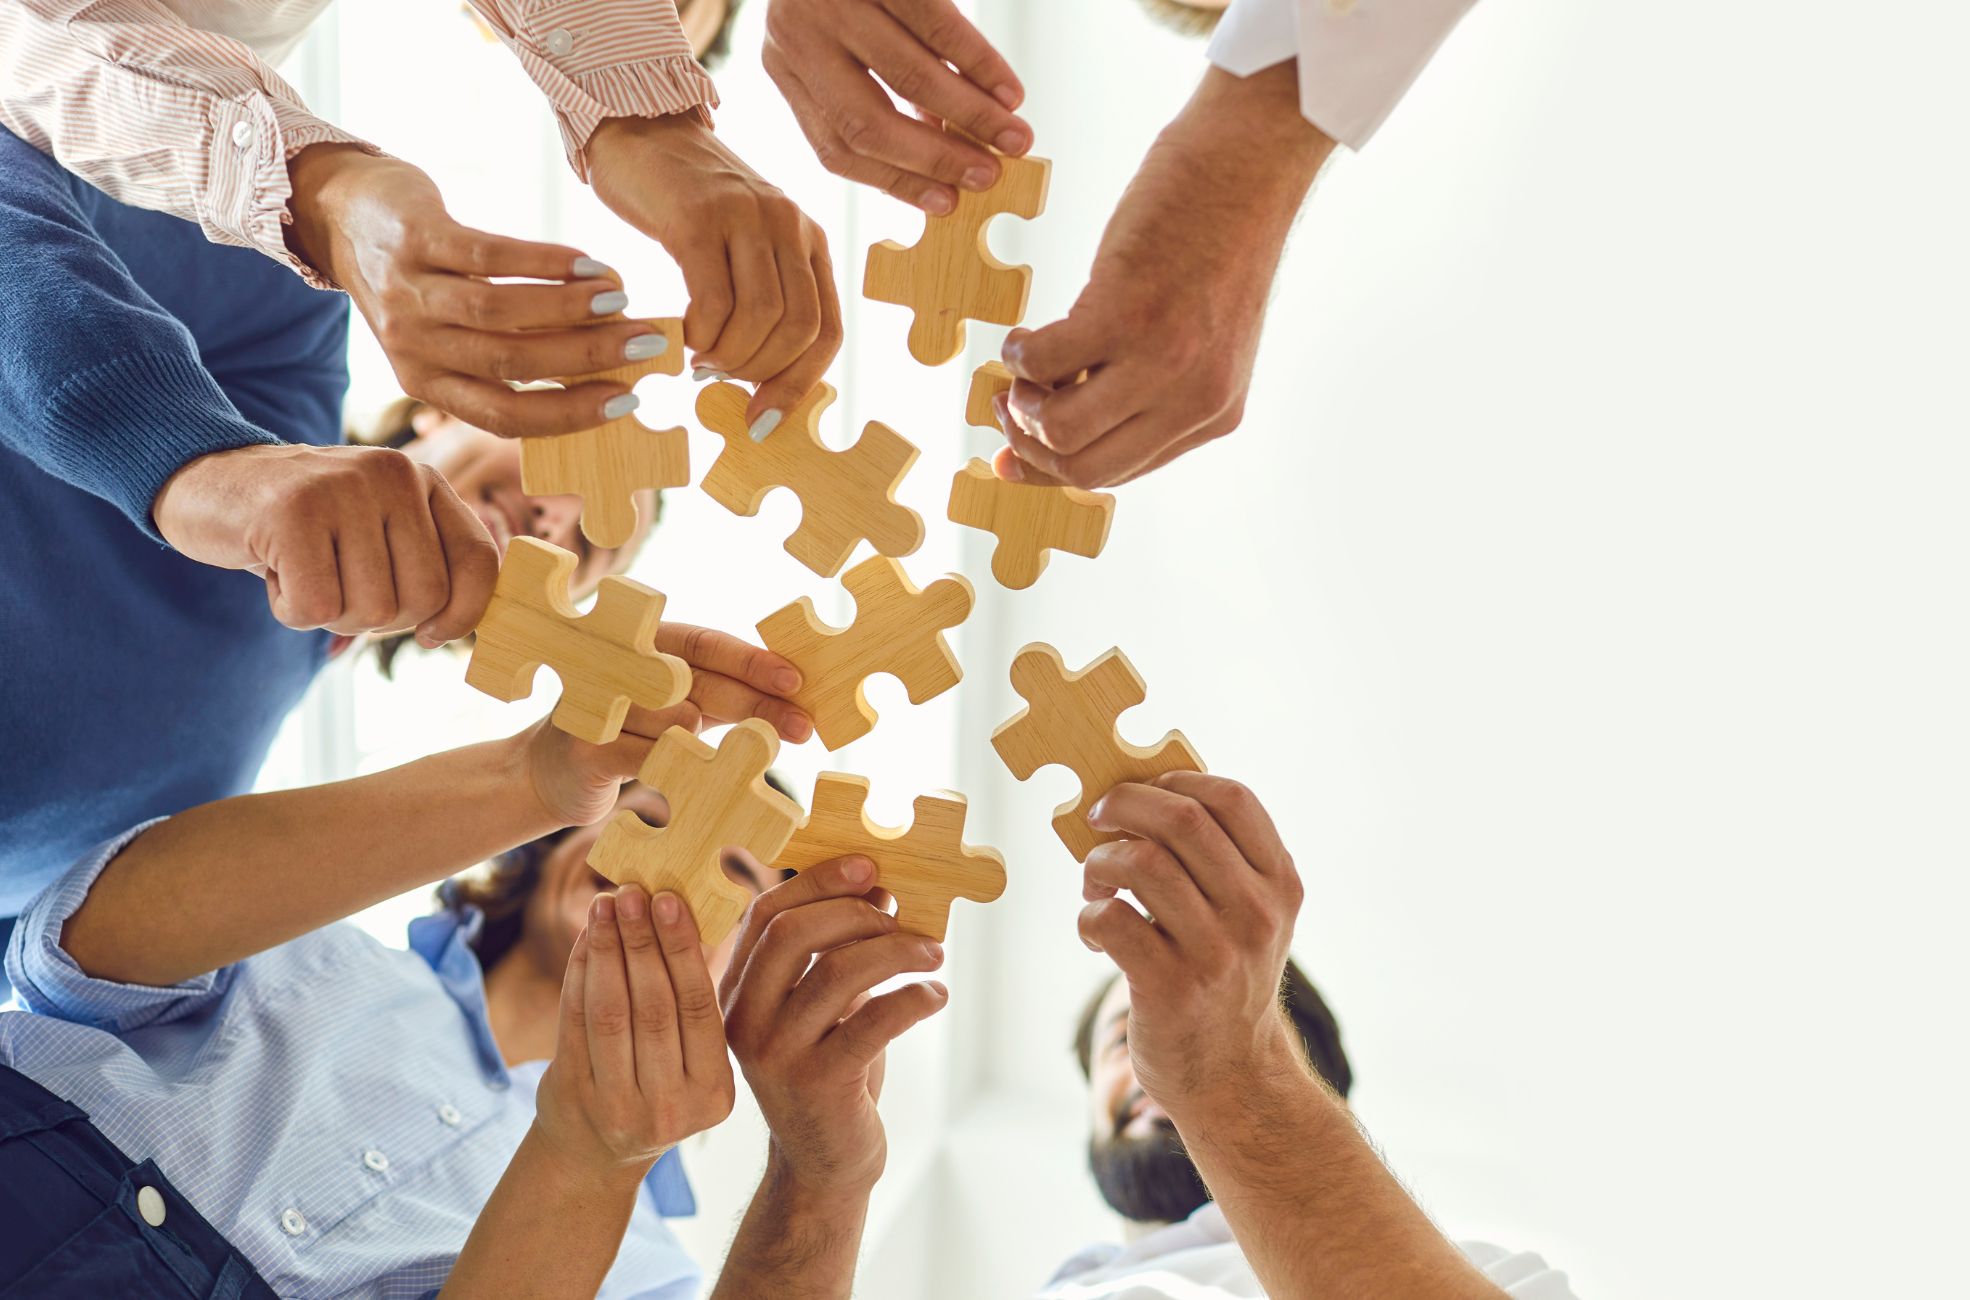 Stock photo Employee Engagement With Puzzle Activities